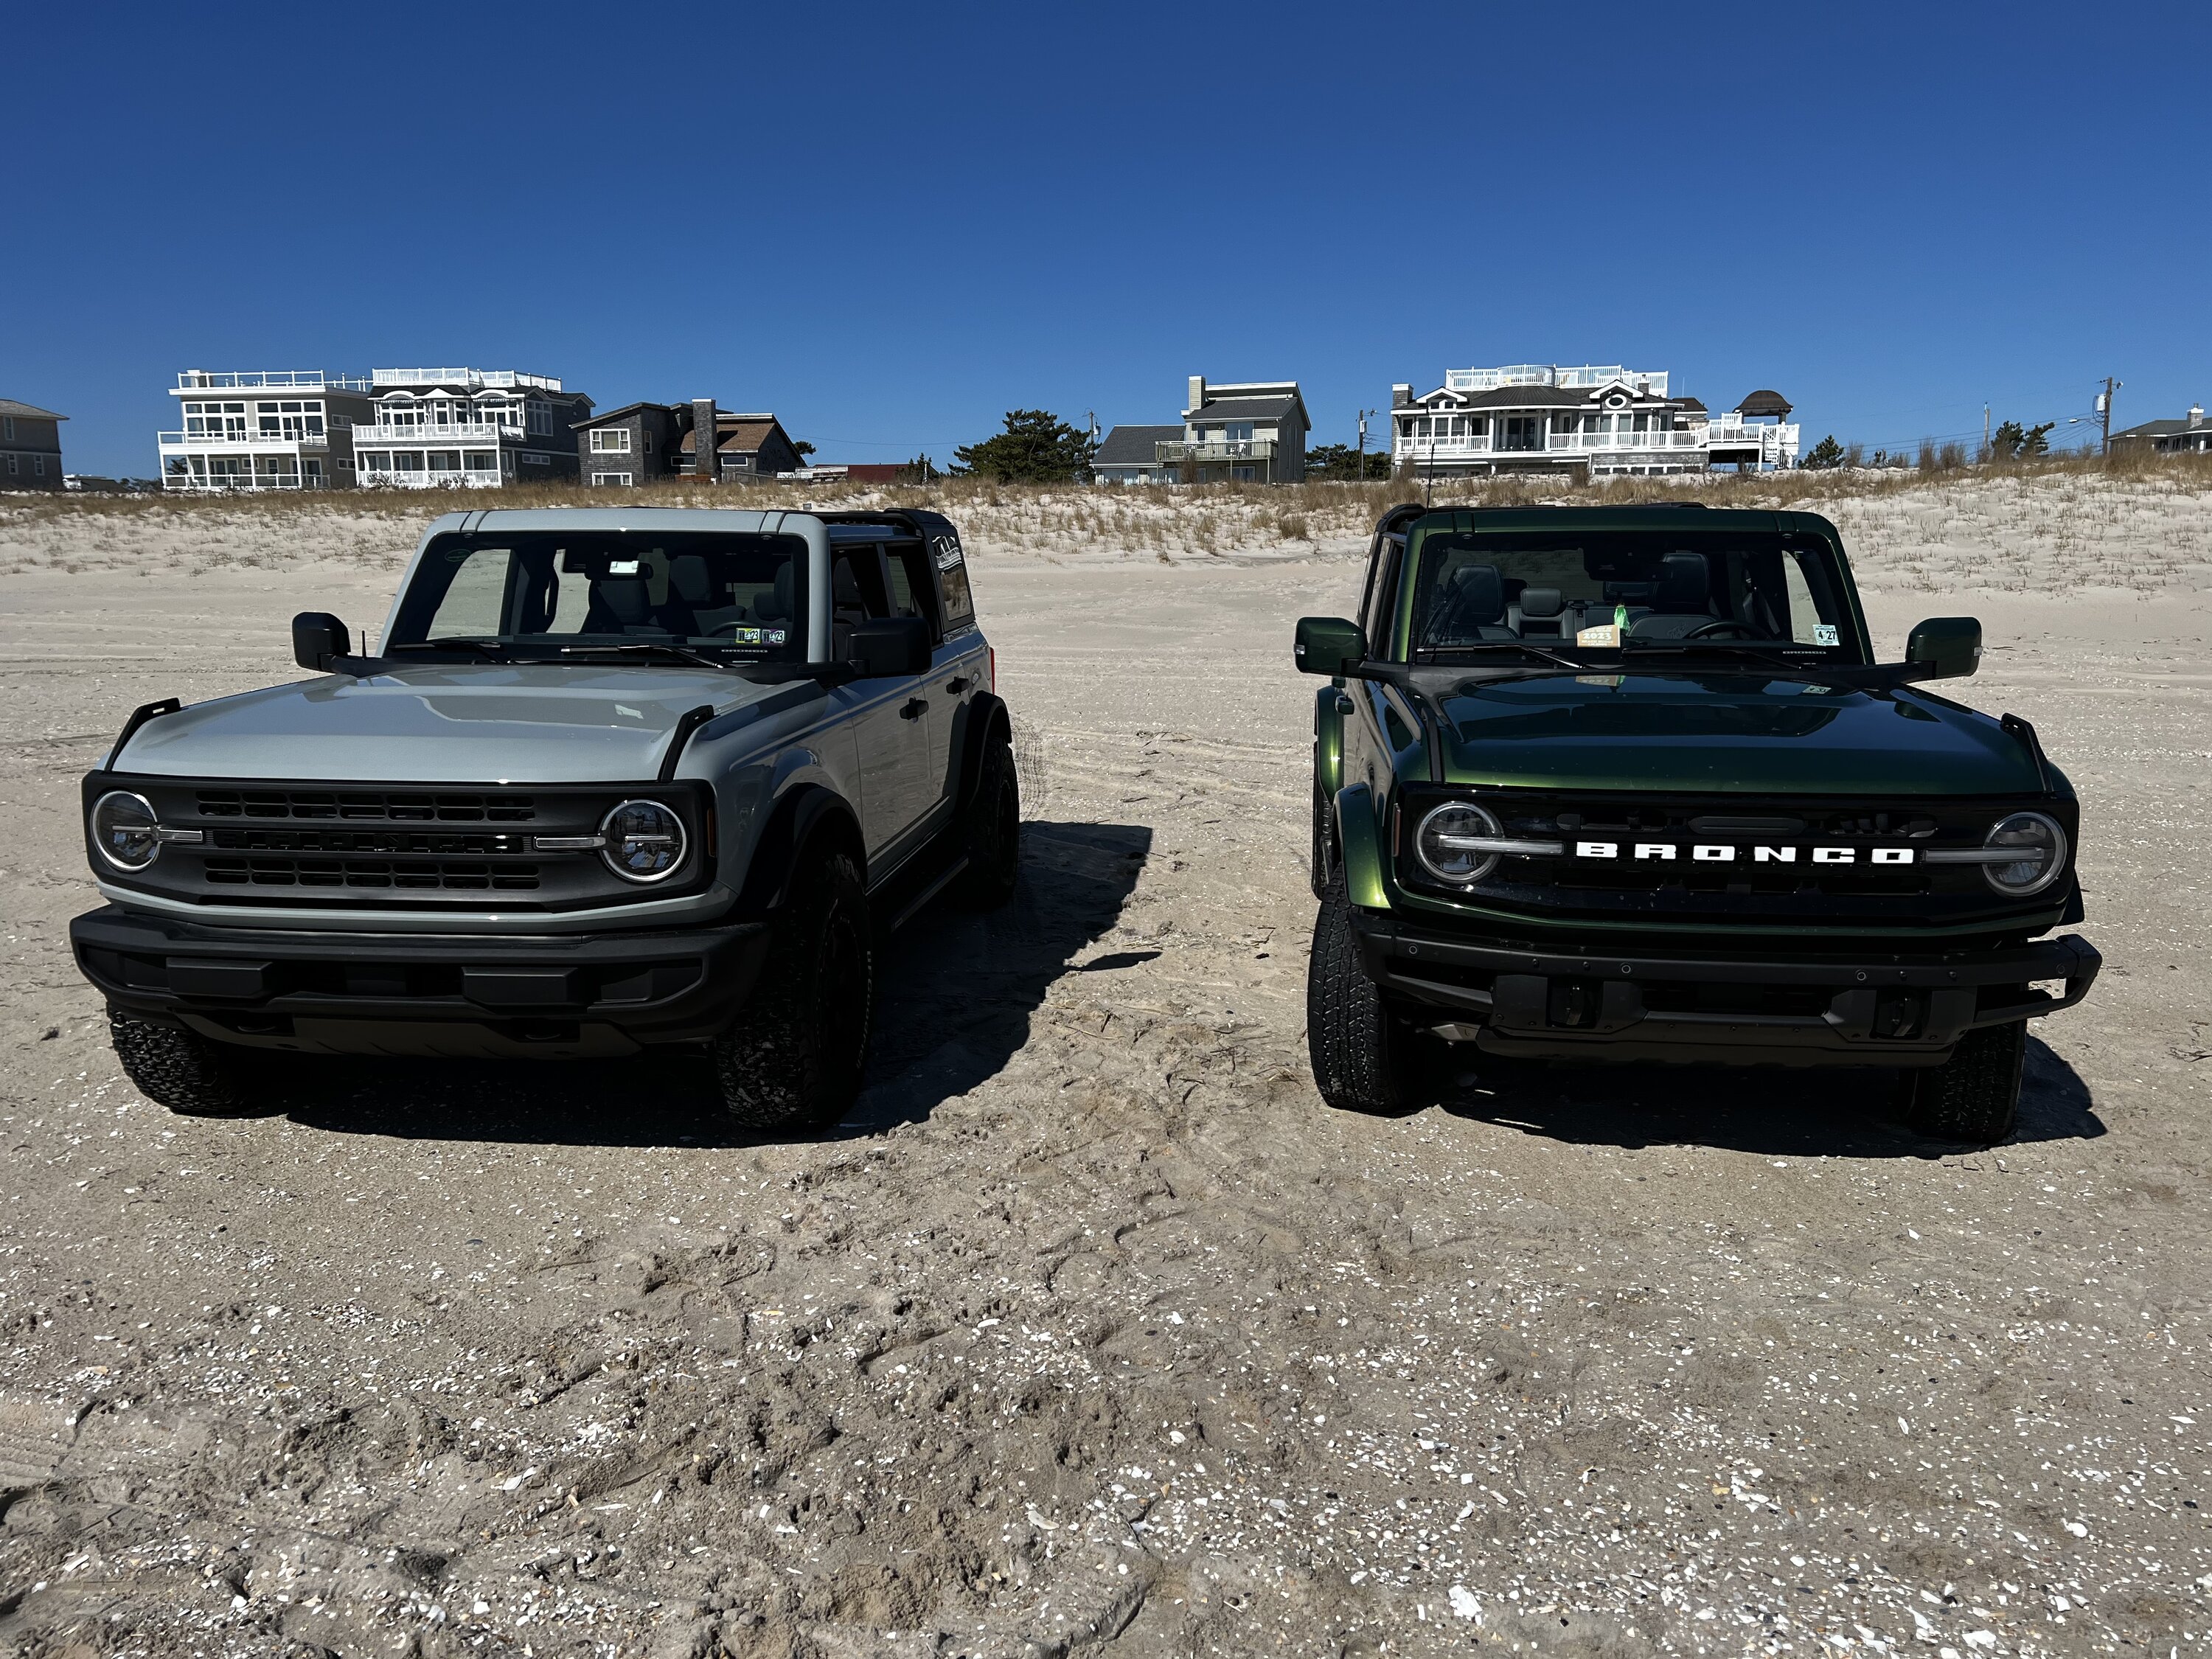 Ford Bronco Beach Builds / Surf Fishing Builds ready for the summer? Post yours! IMG_8852